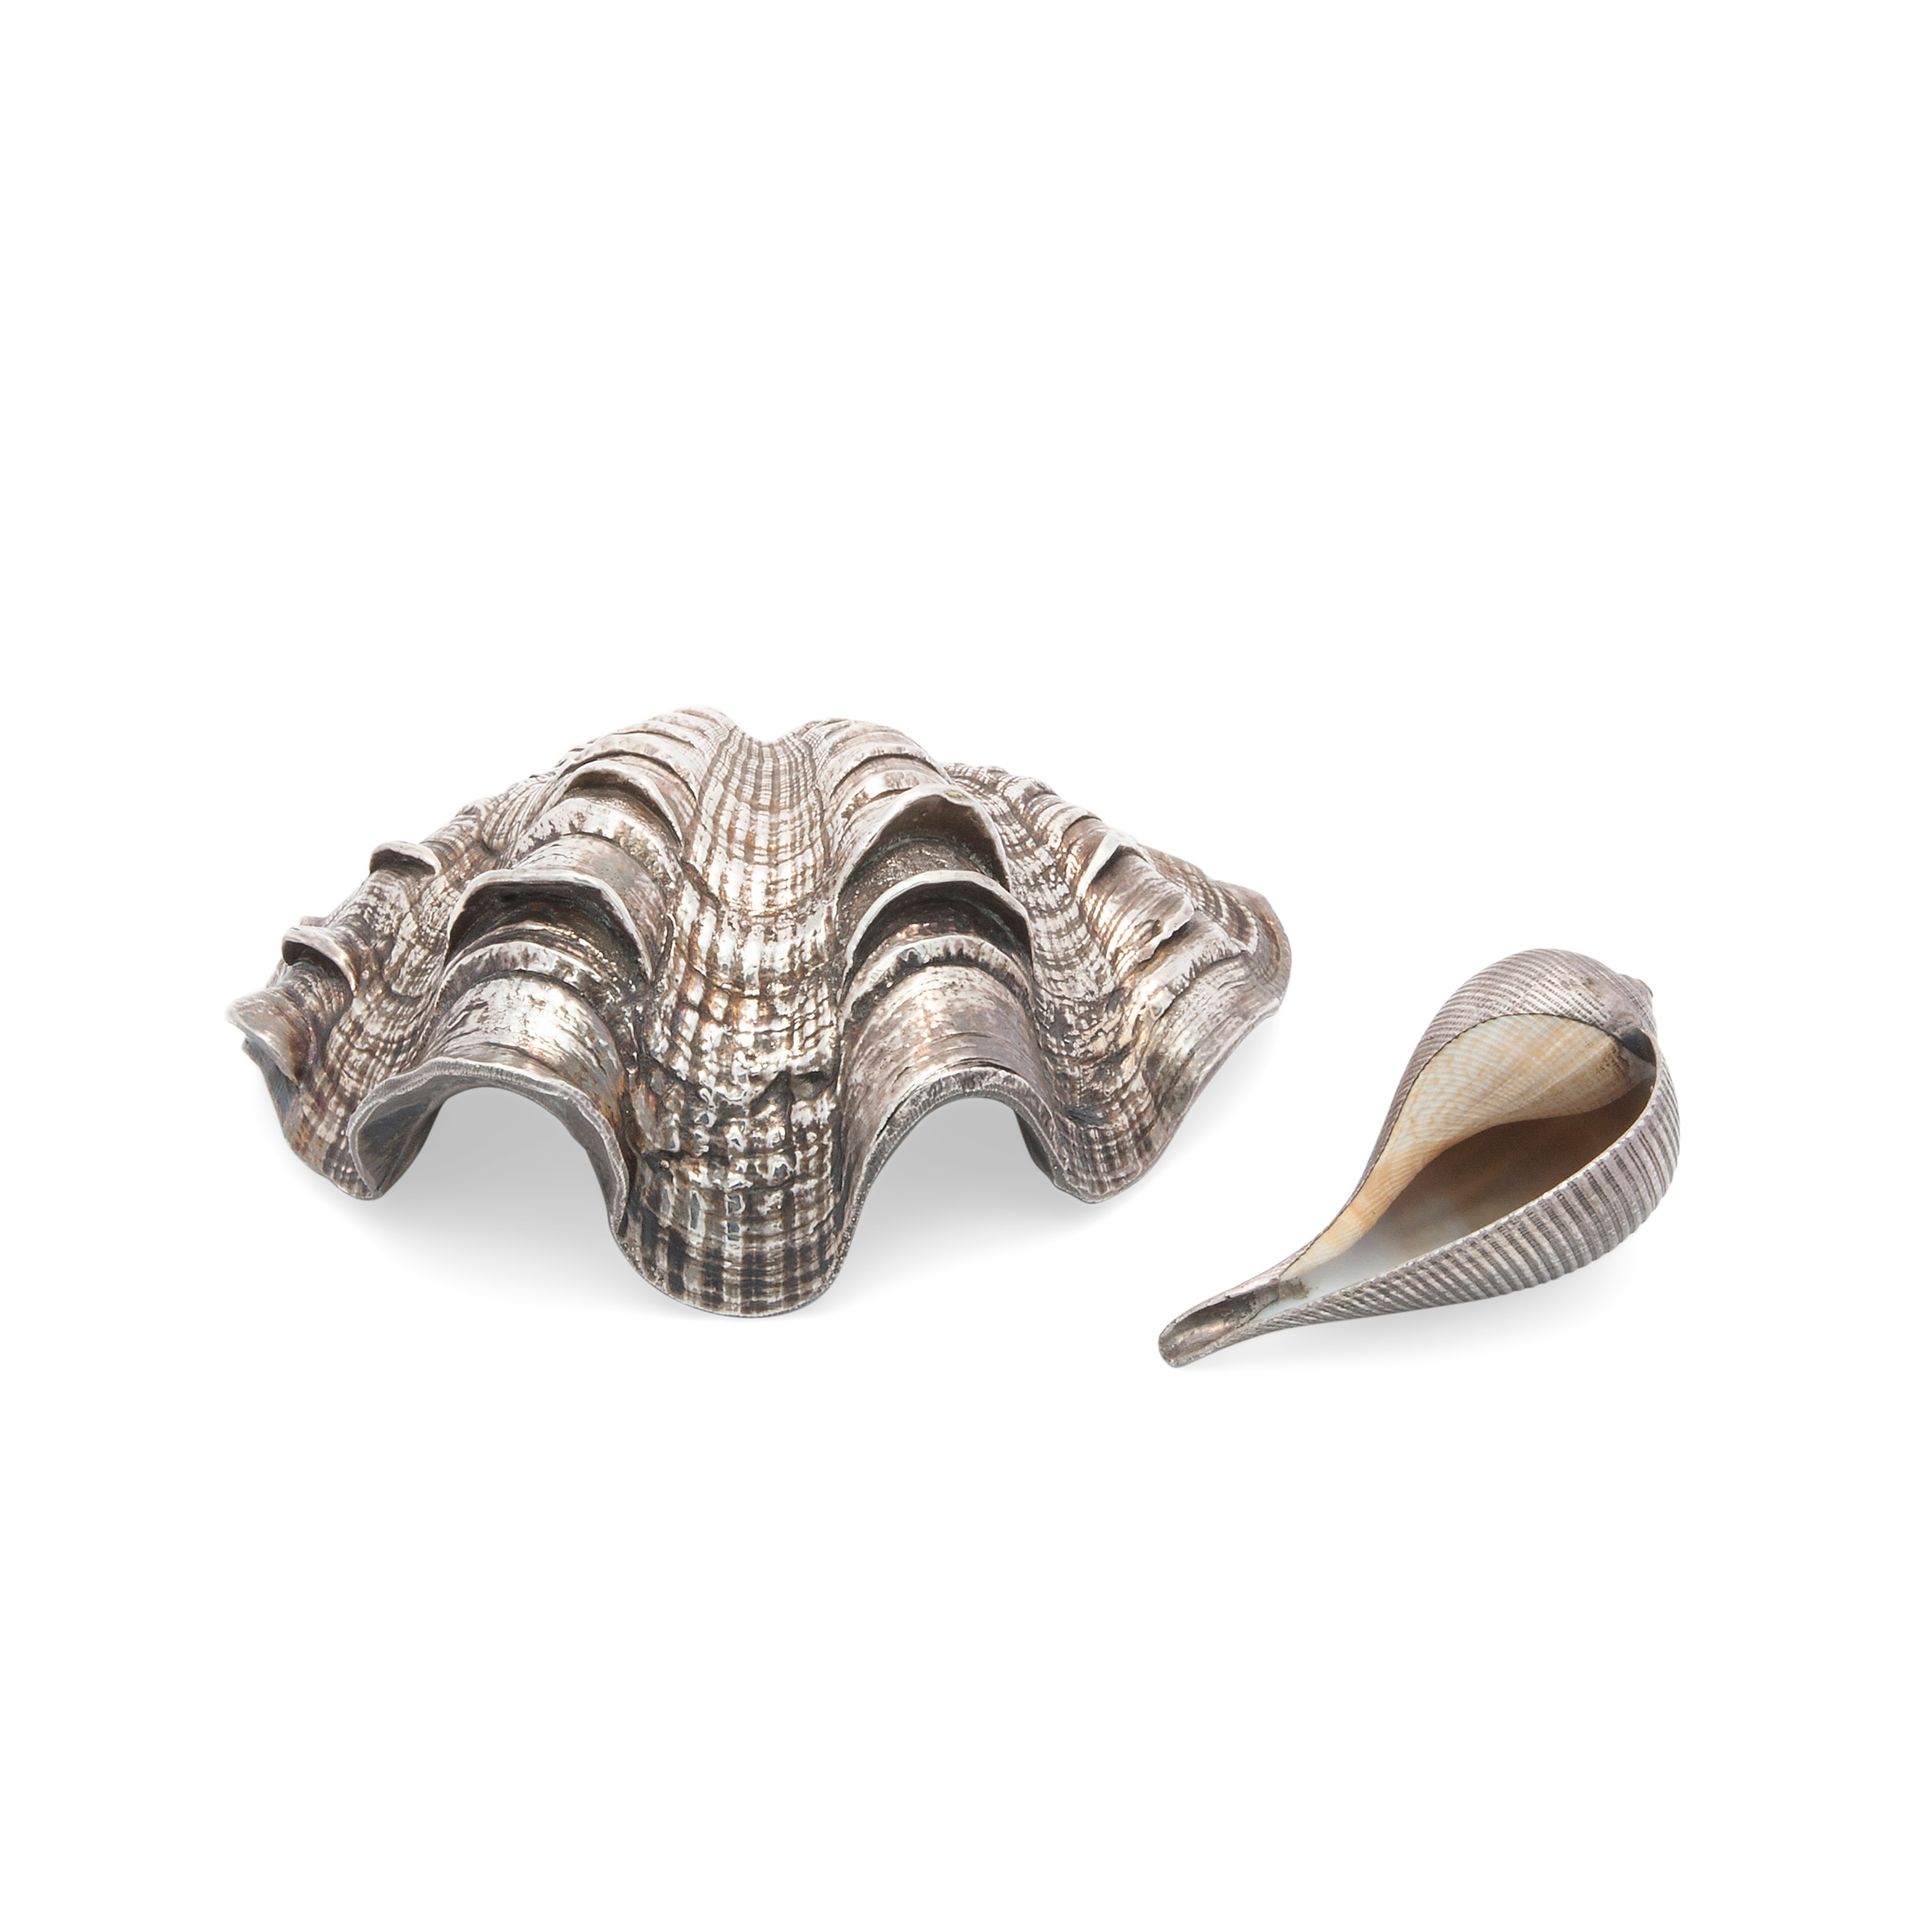 Two silver-plated shells, old manufacture Poinçons identifiant la fabrication et&hellip;